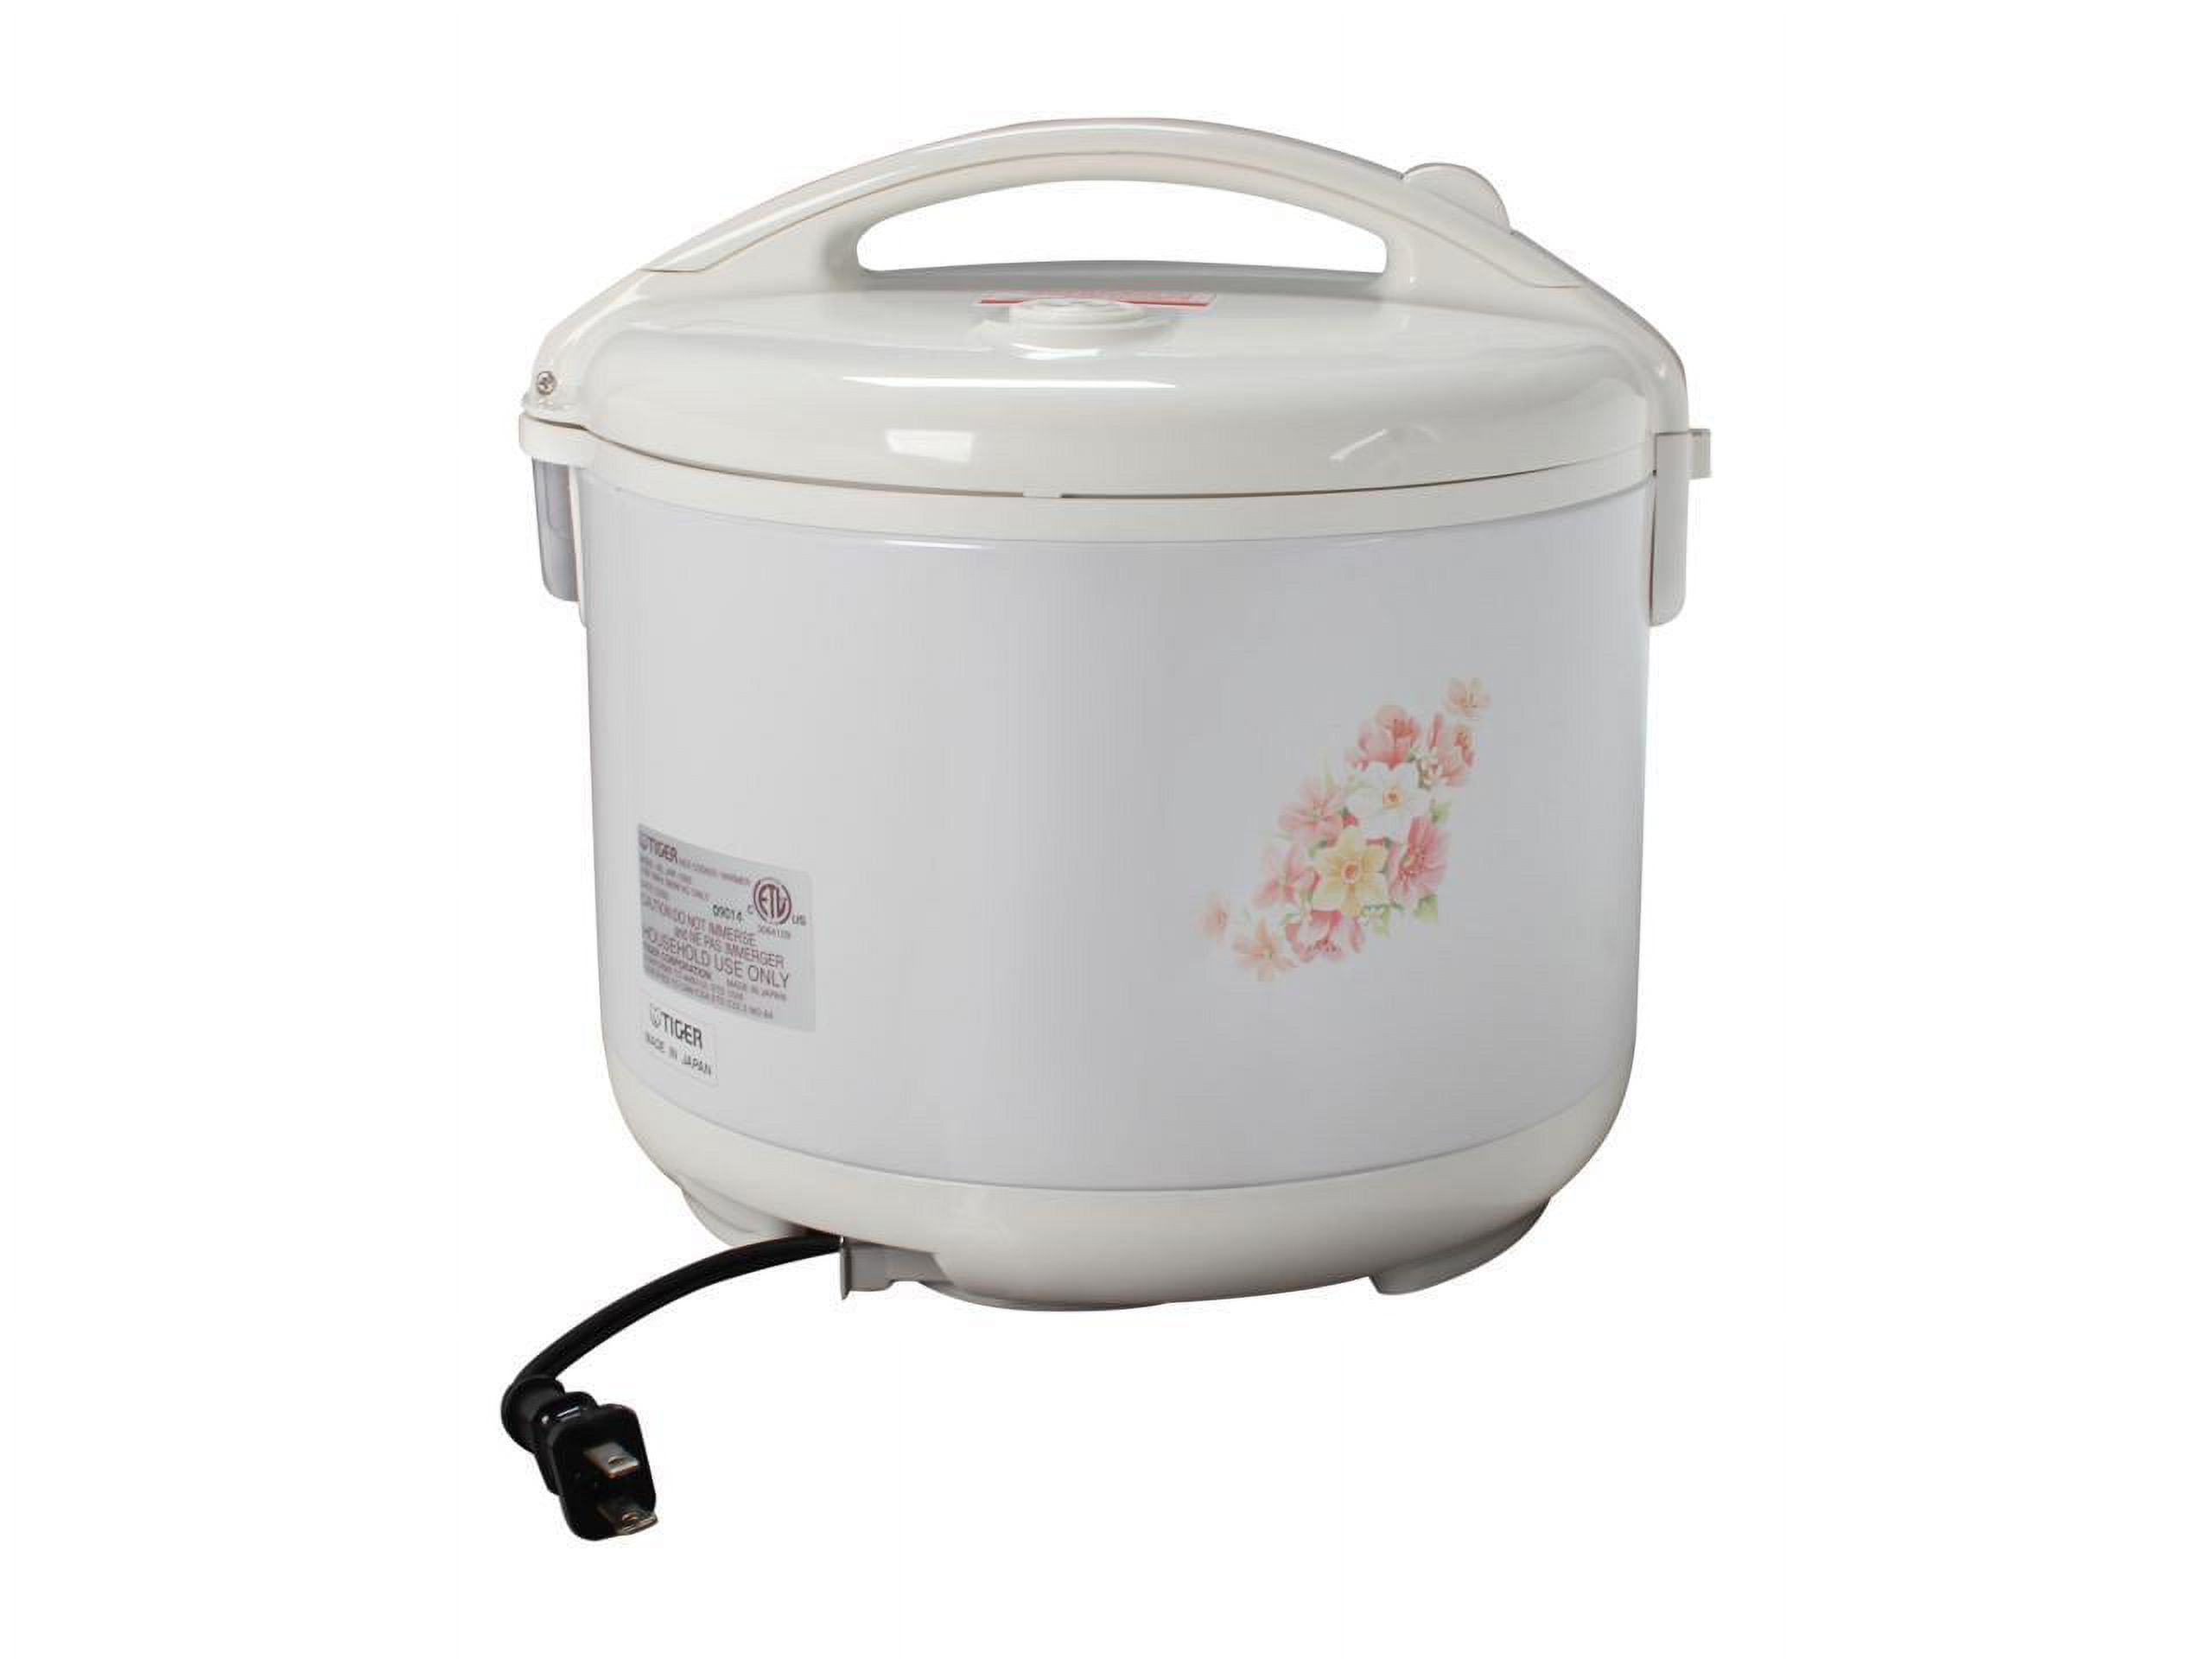 Tiger 8 Cups Rice Cooker Non Stick Coating Inner Pot - Macy's